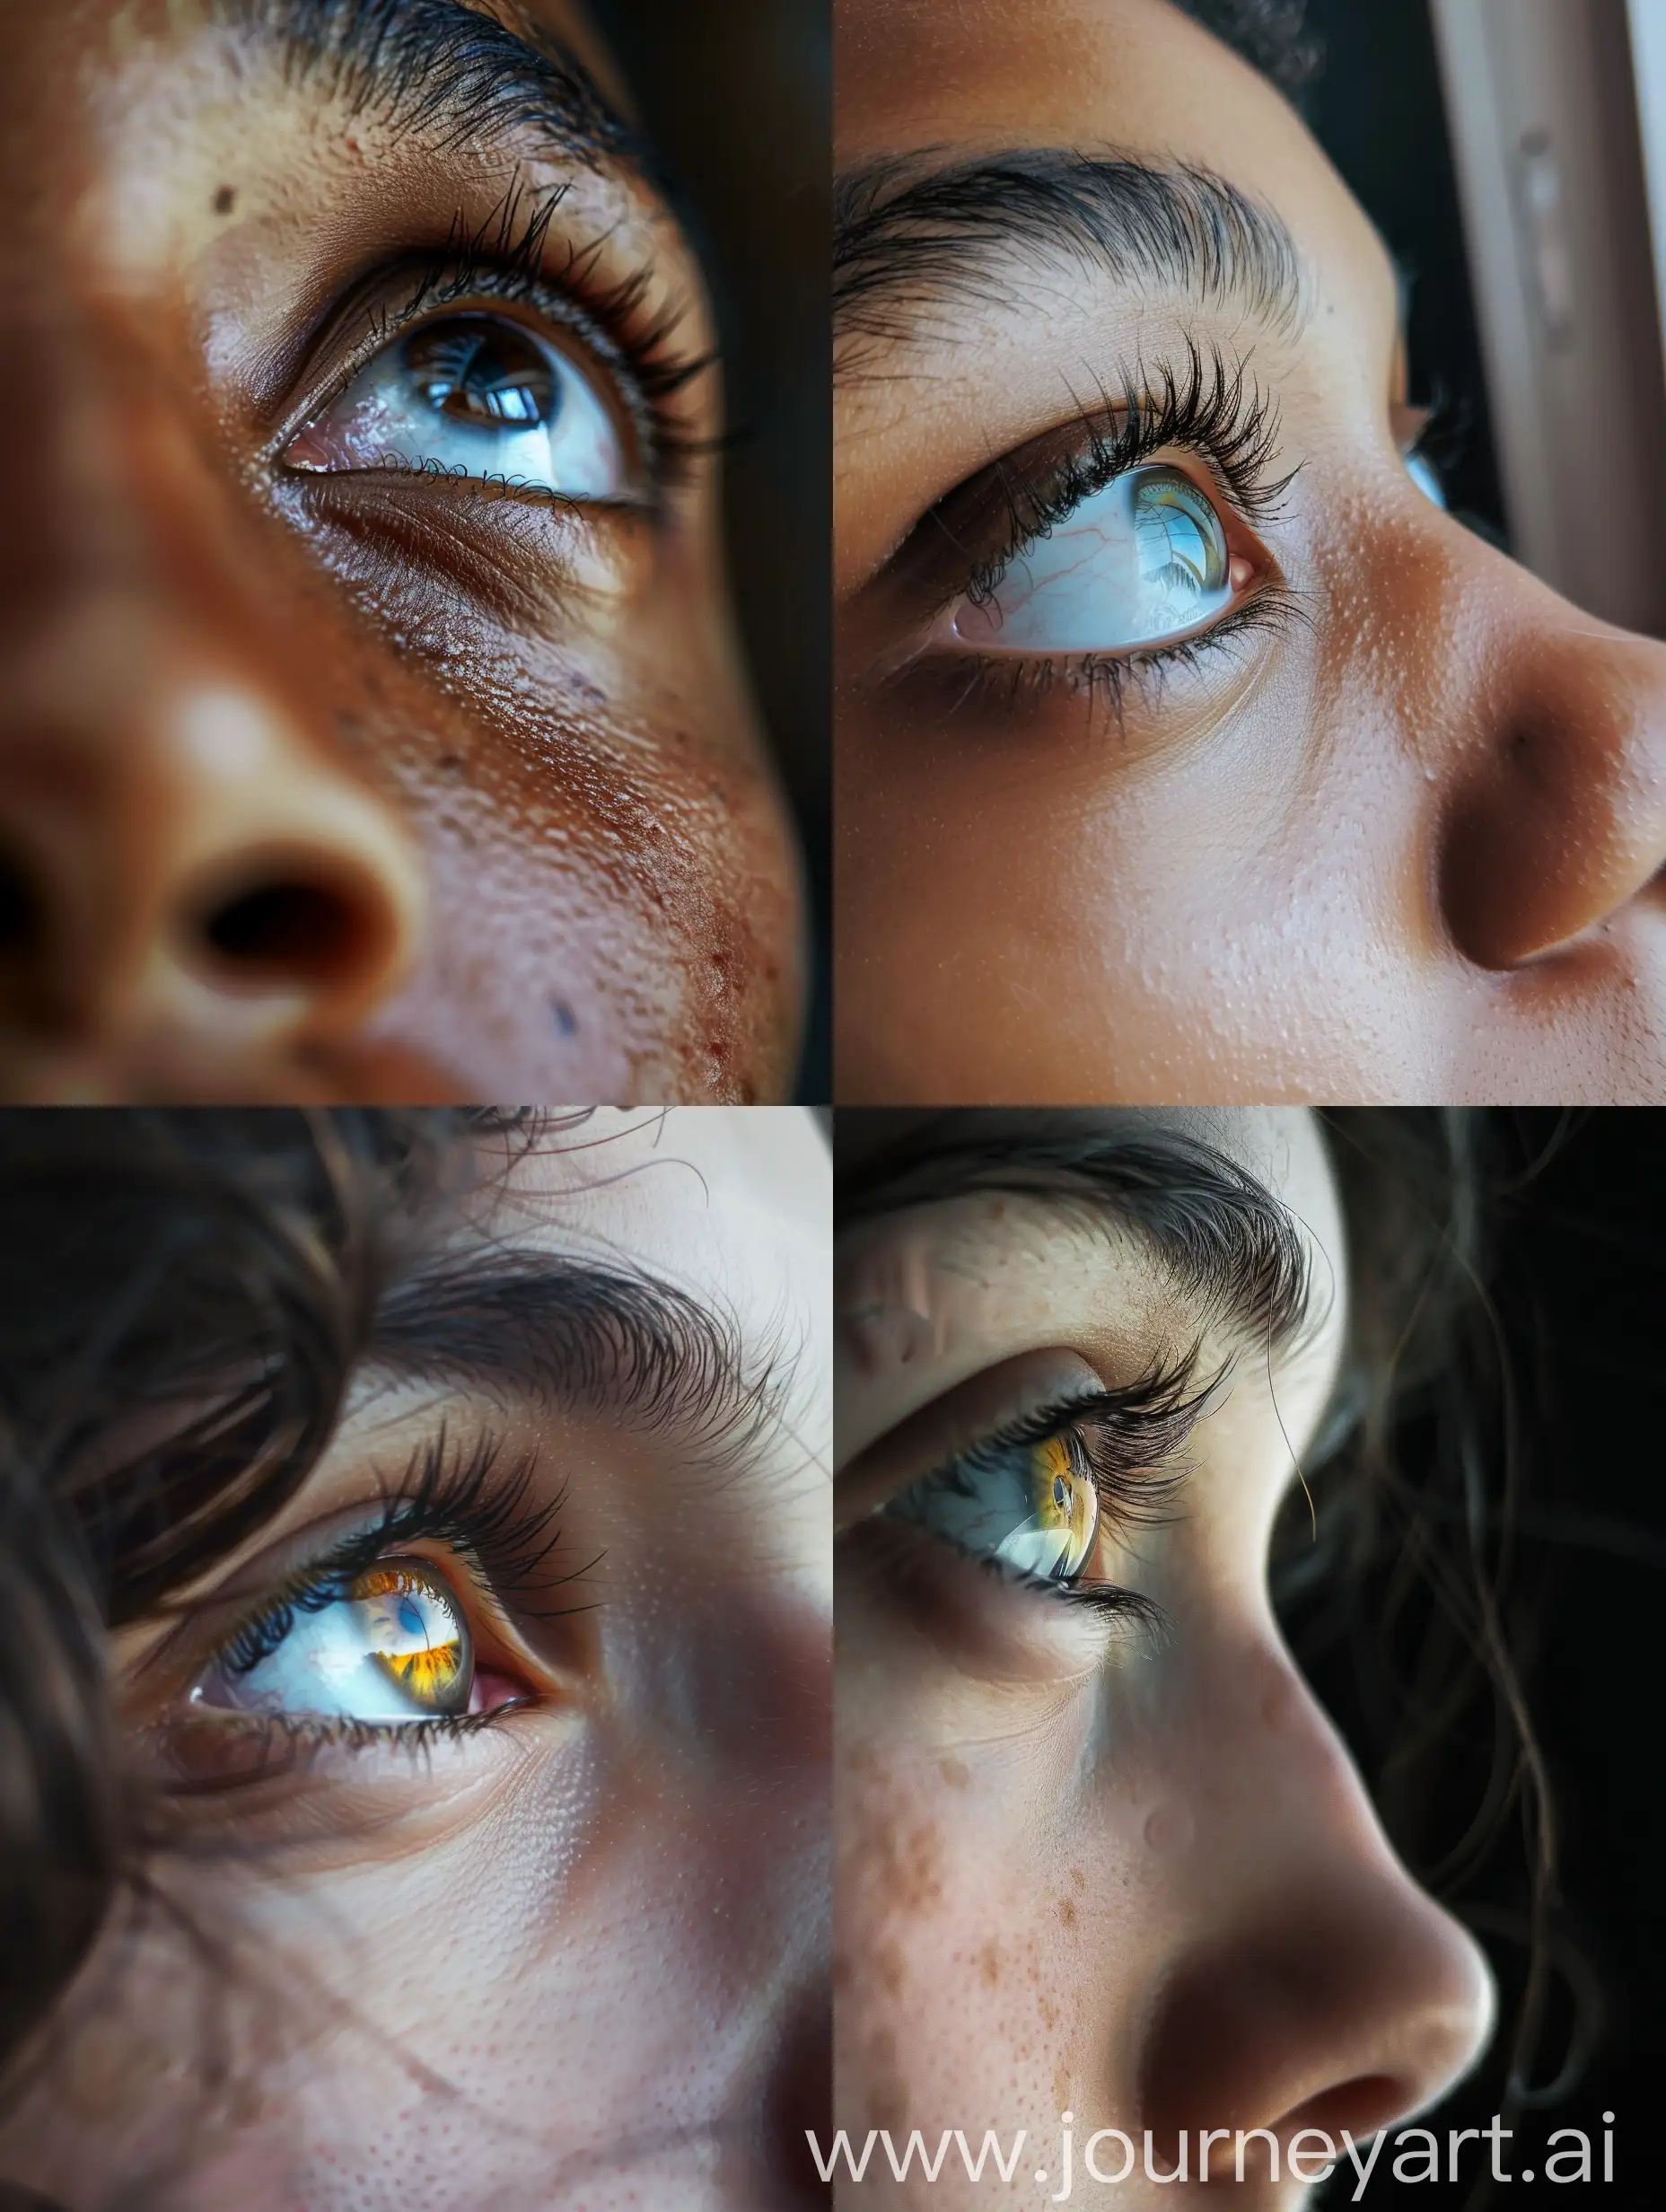 A close-up of a person's eyes filled with dreams and hope.